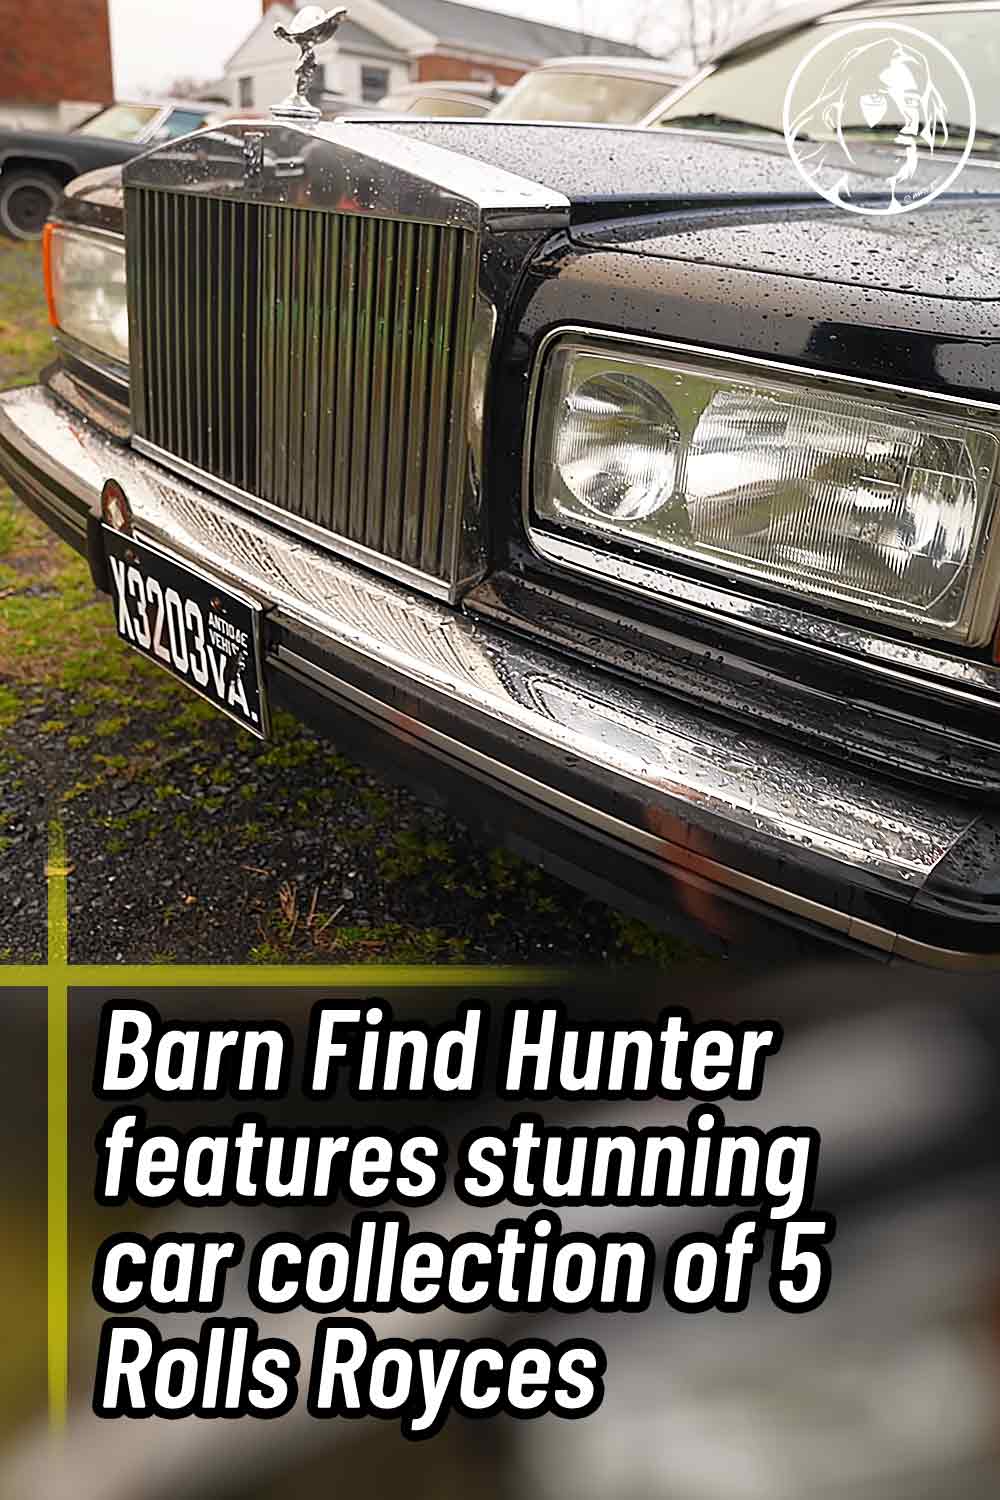 Barn Find Hunter features stunning car collection of 5 Rolls Royces